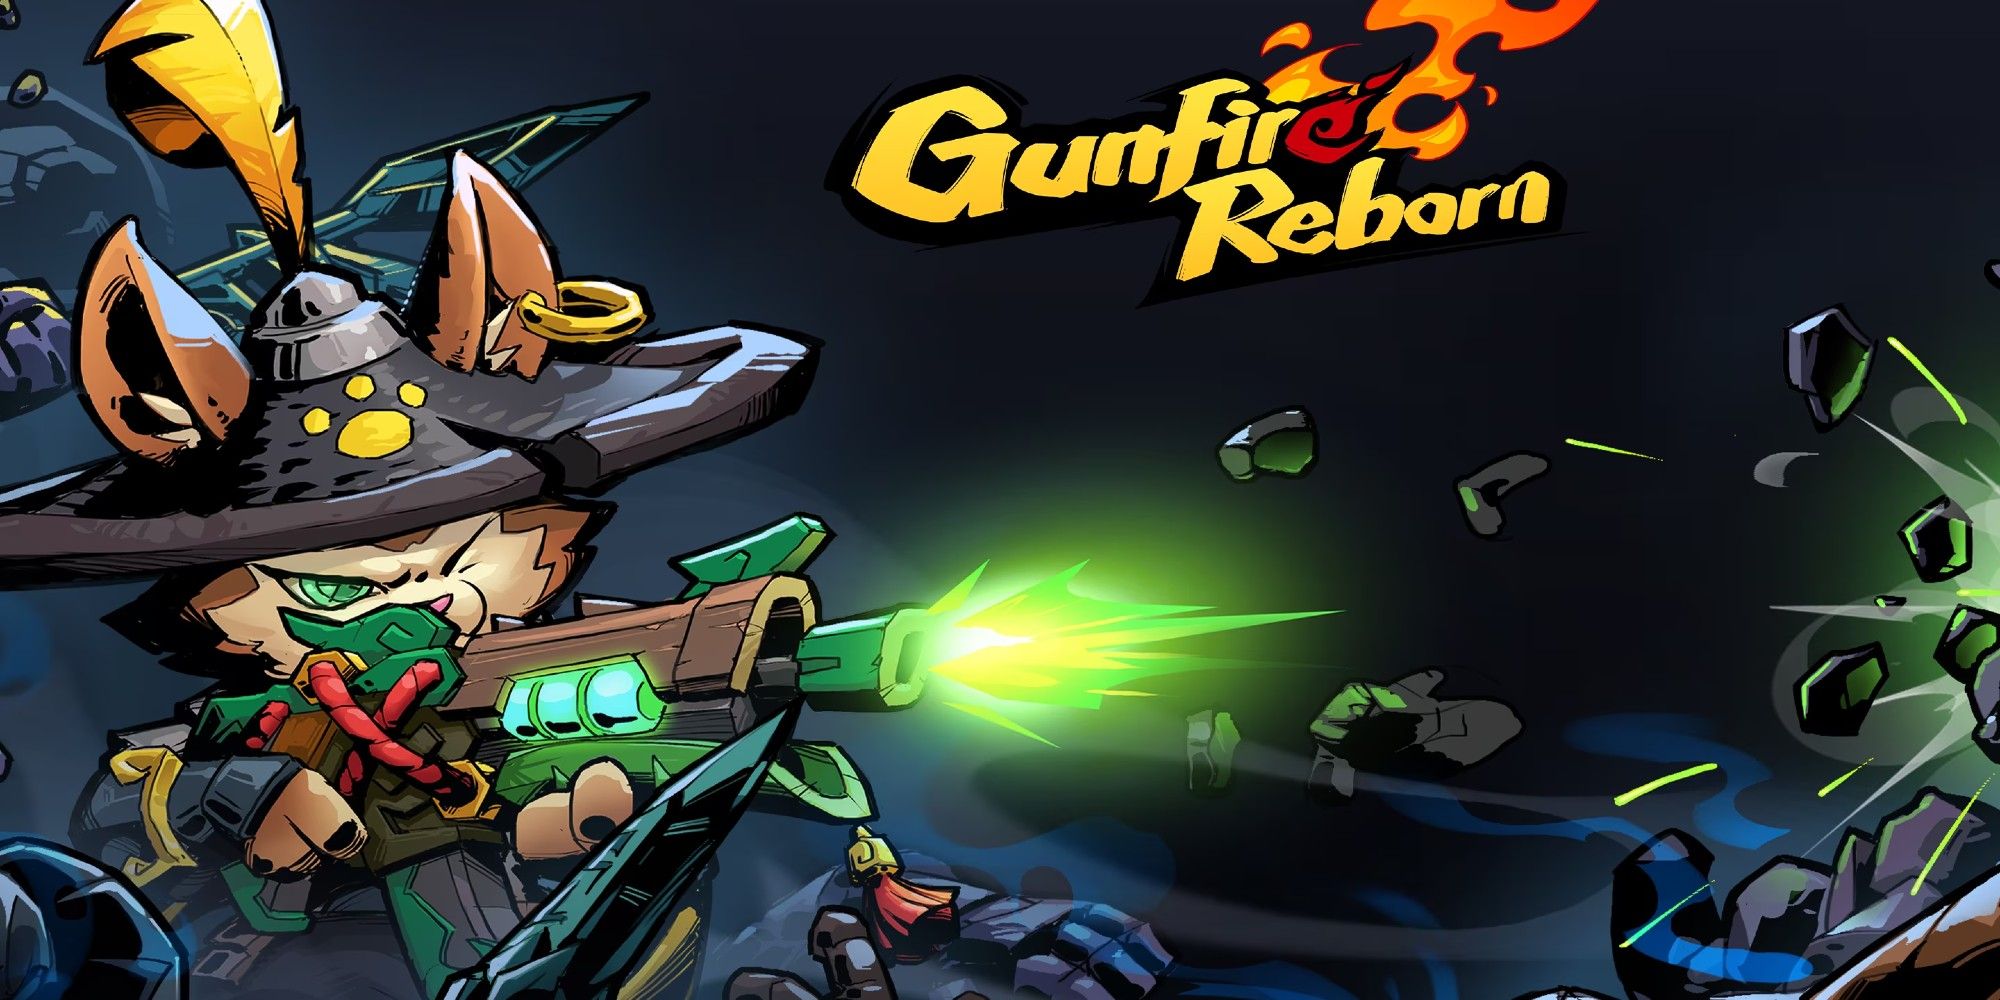 Gunfire Reborn Cover, main character shooting a gun and rocks fly from the impact